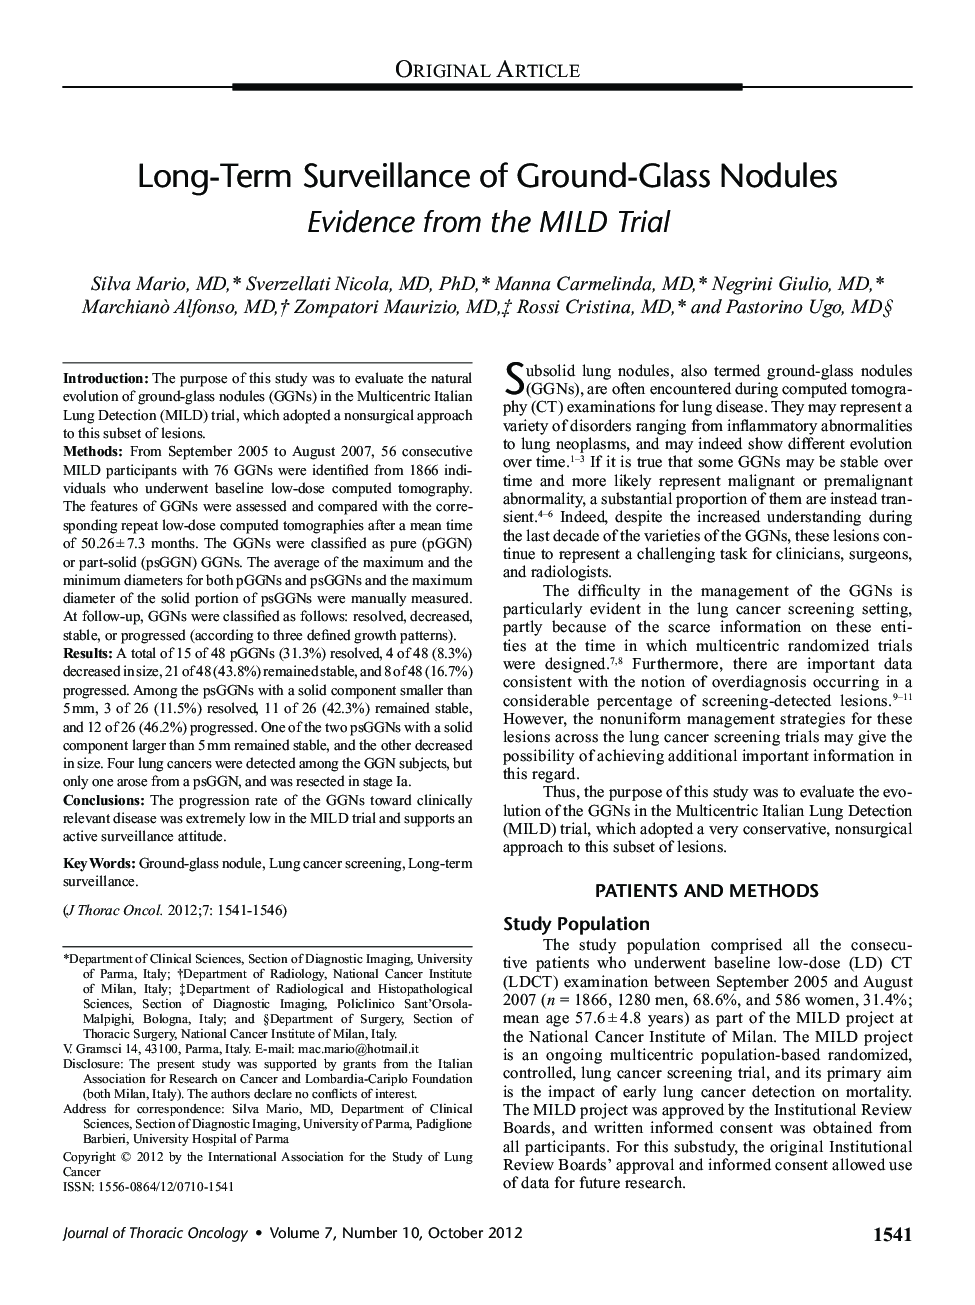 Long-Term Surveillance of Ground-Glass Nodules: Evidence from the MILD Trial 